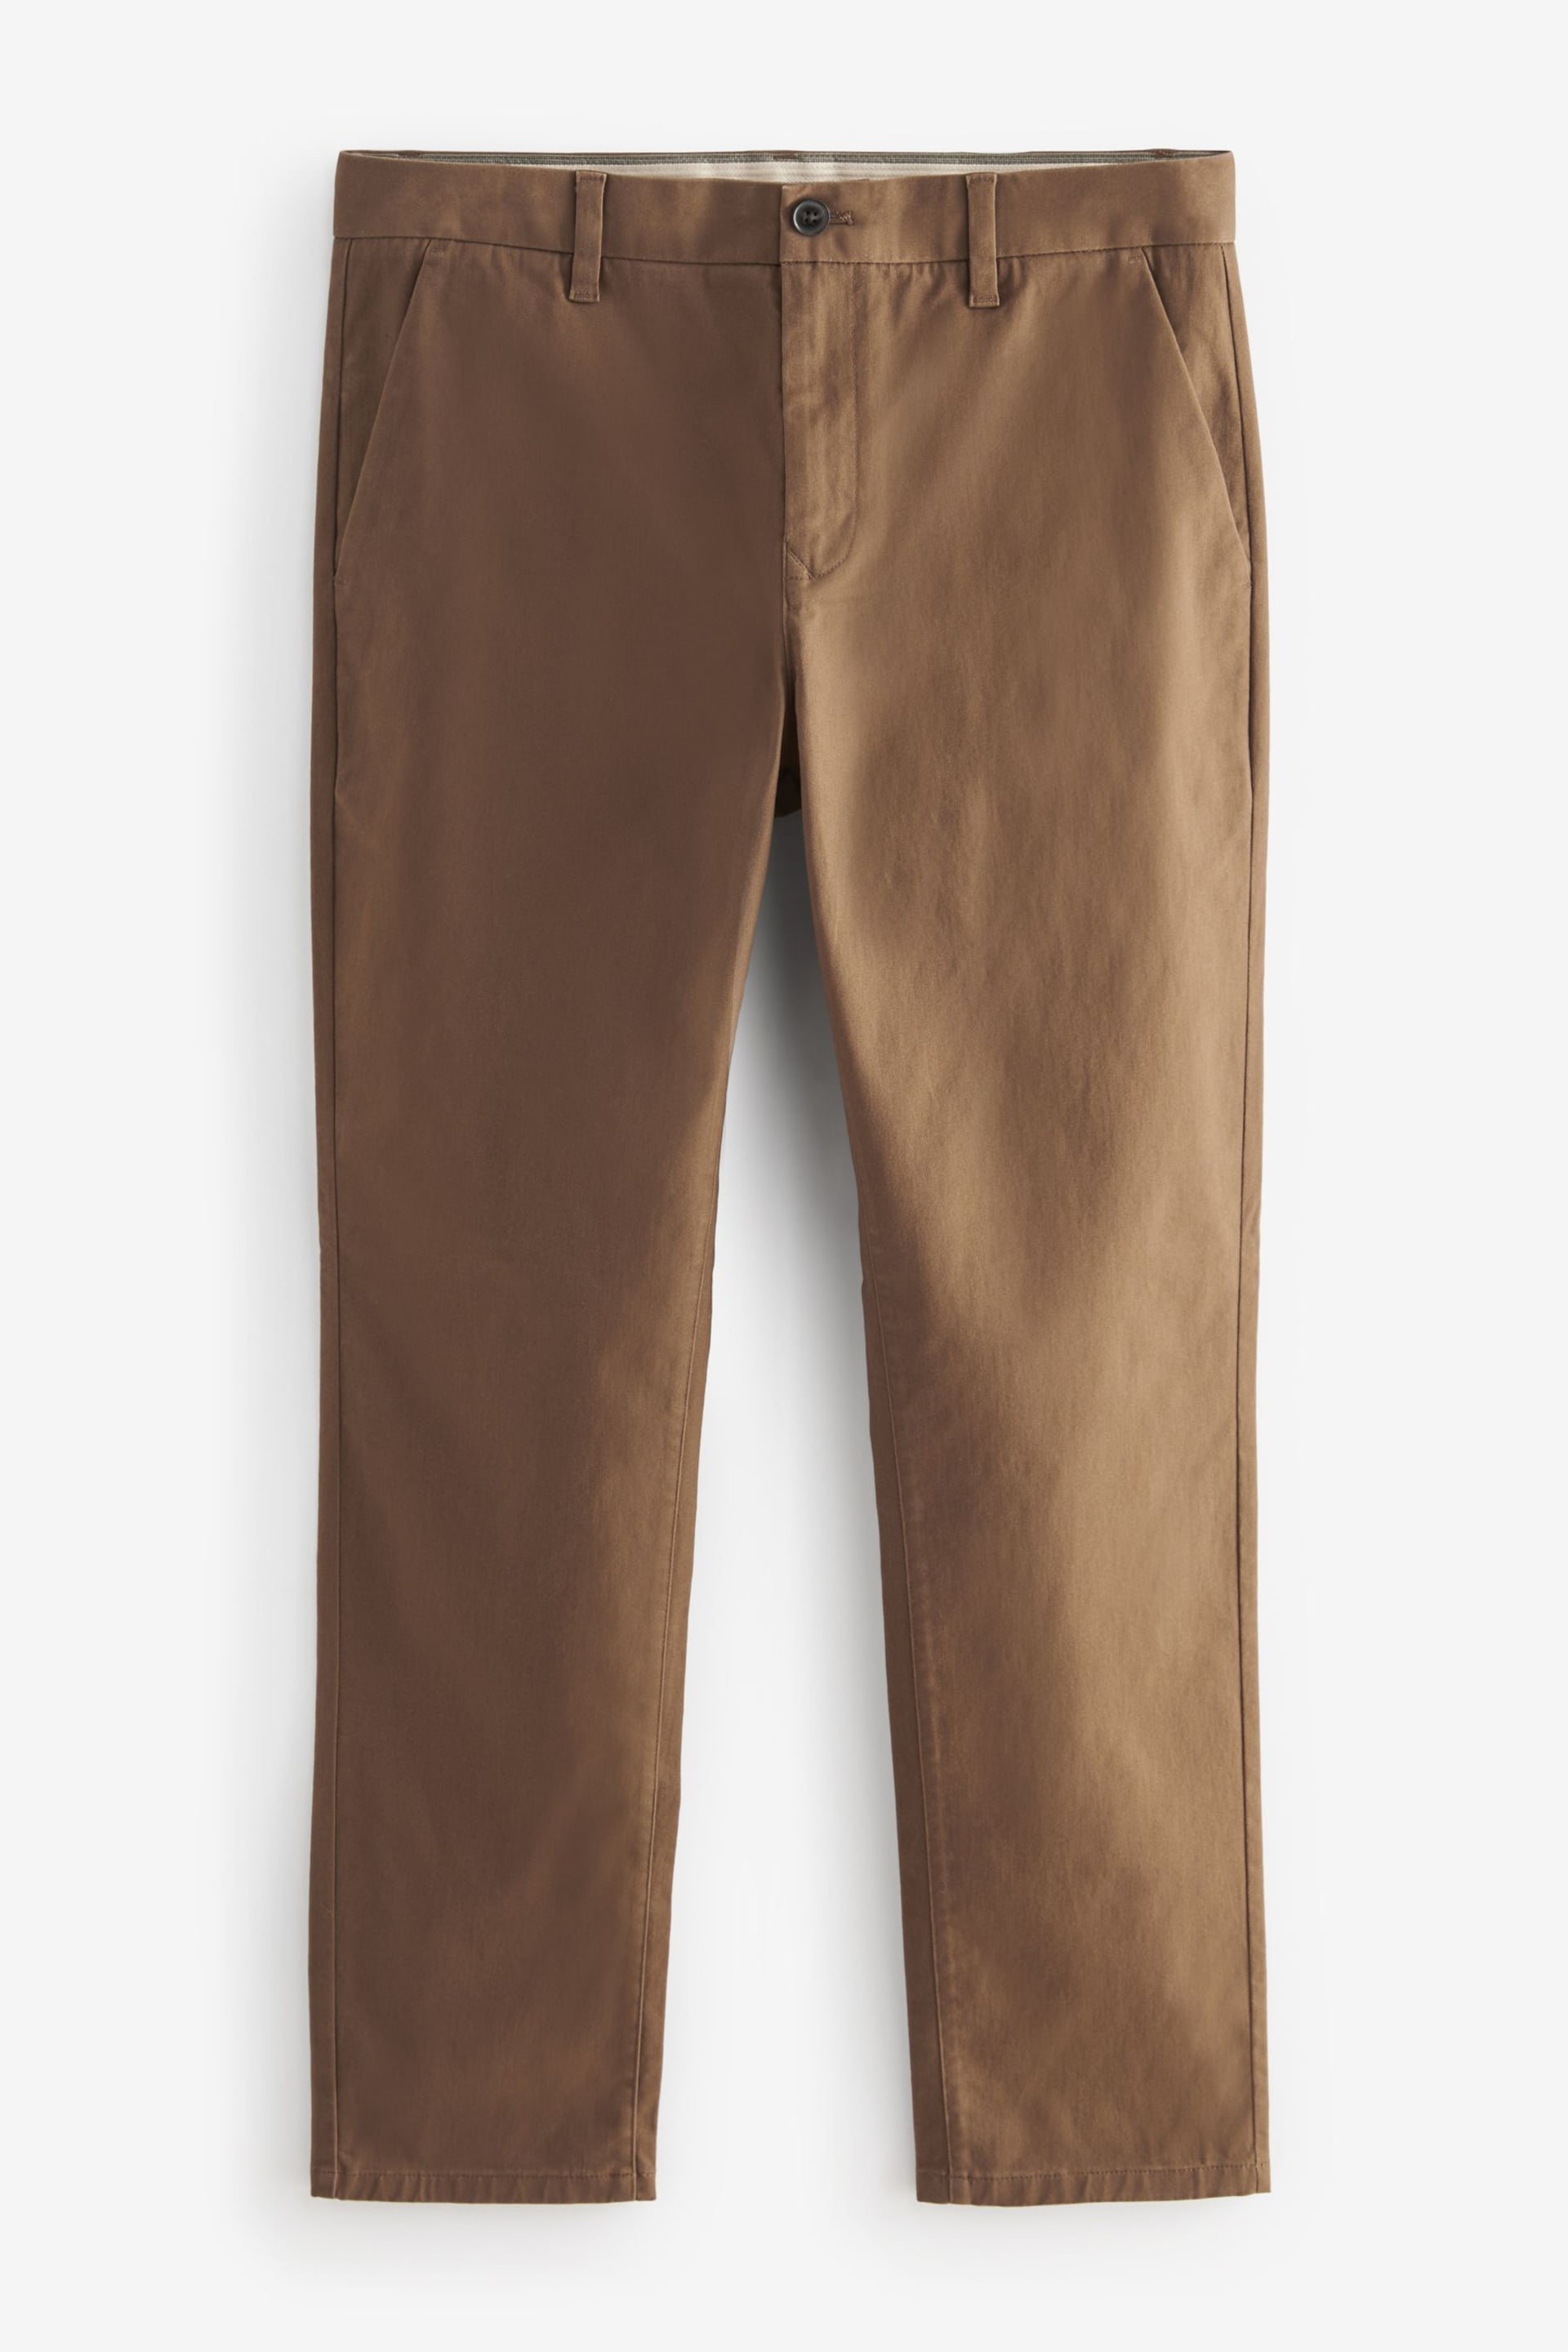 French Navy/Tan Slim Stretch Chino Trousers 2 Pack - Image 10 of 12